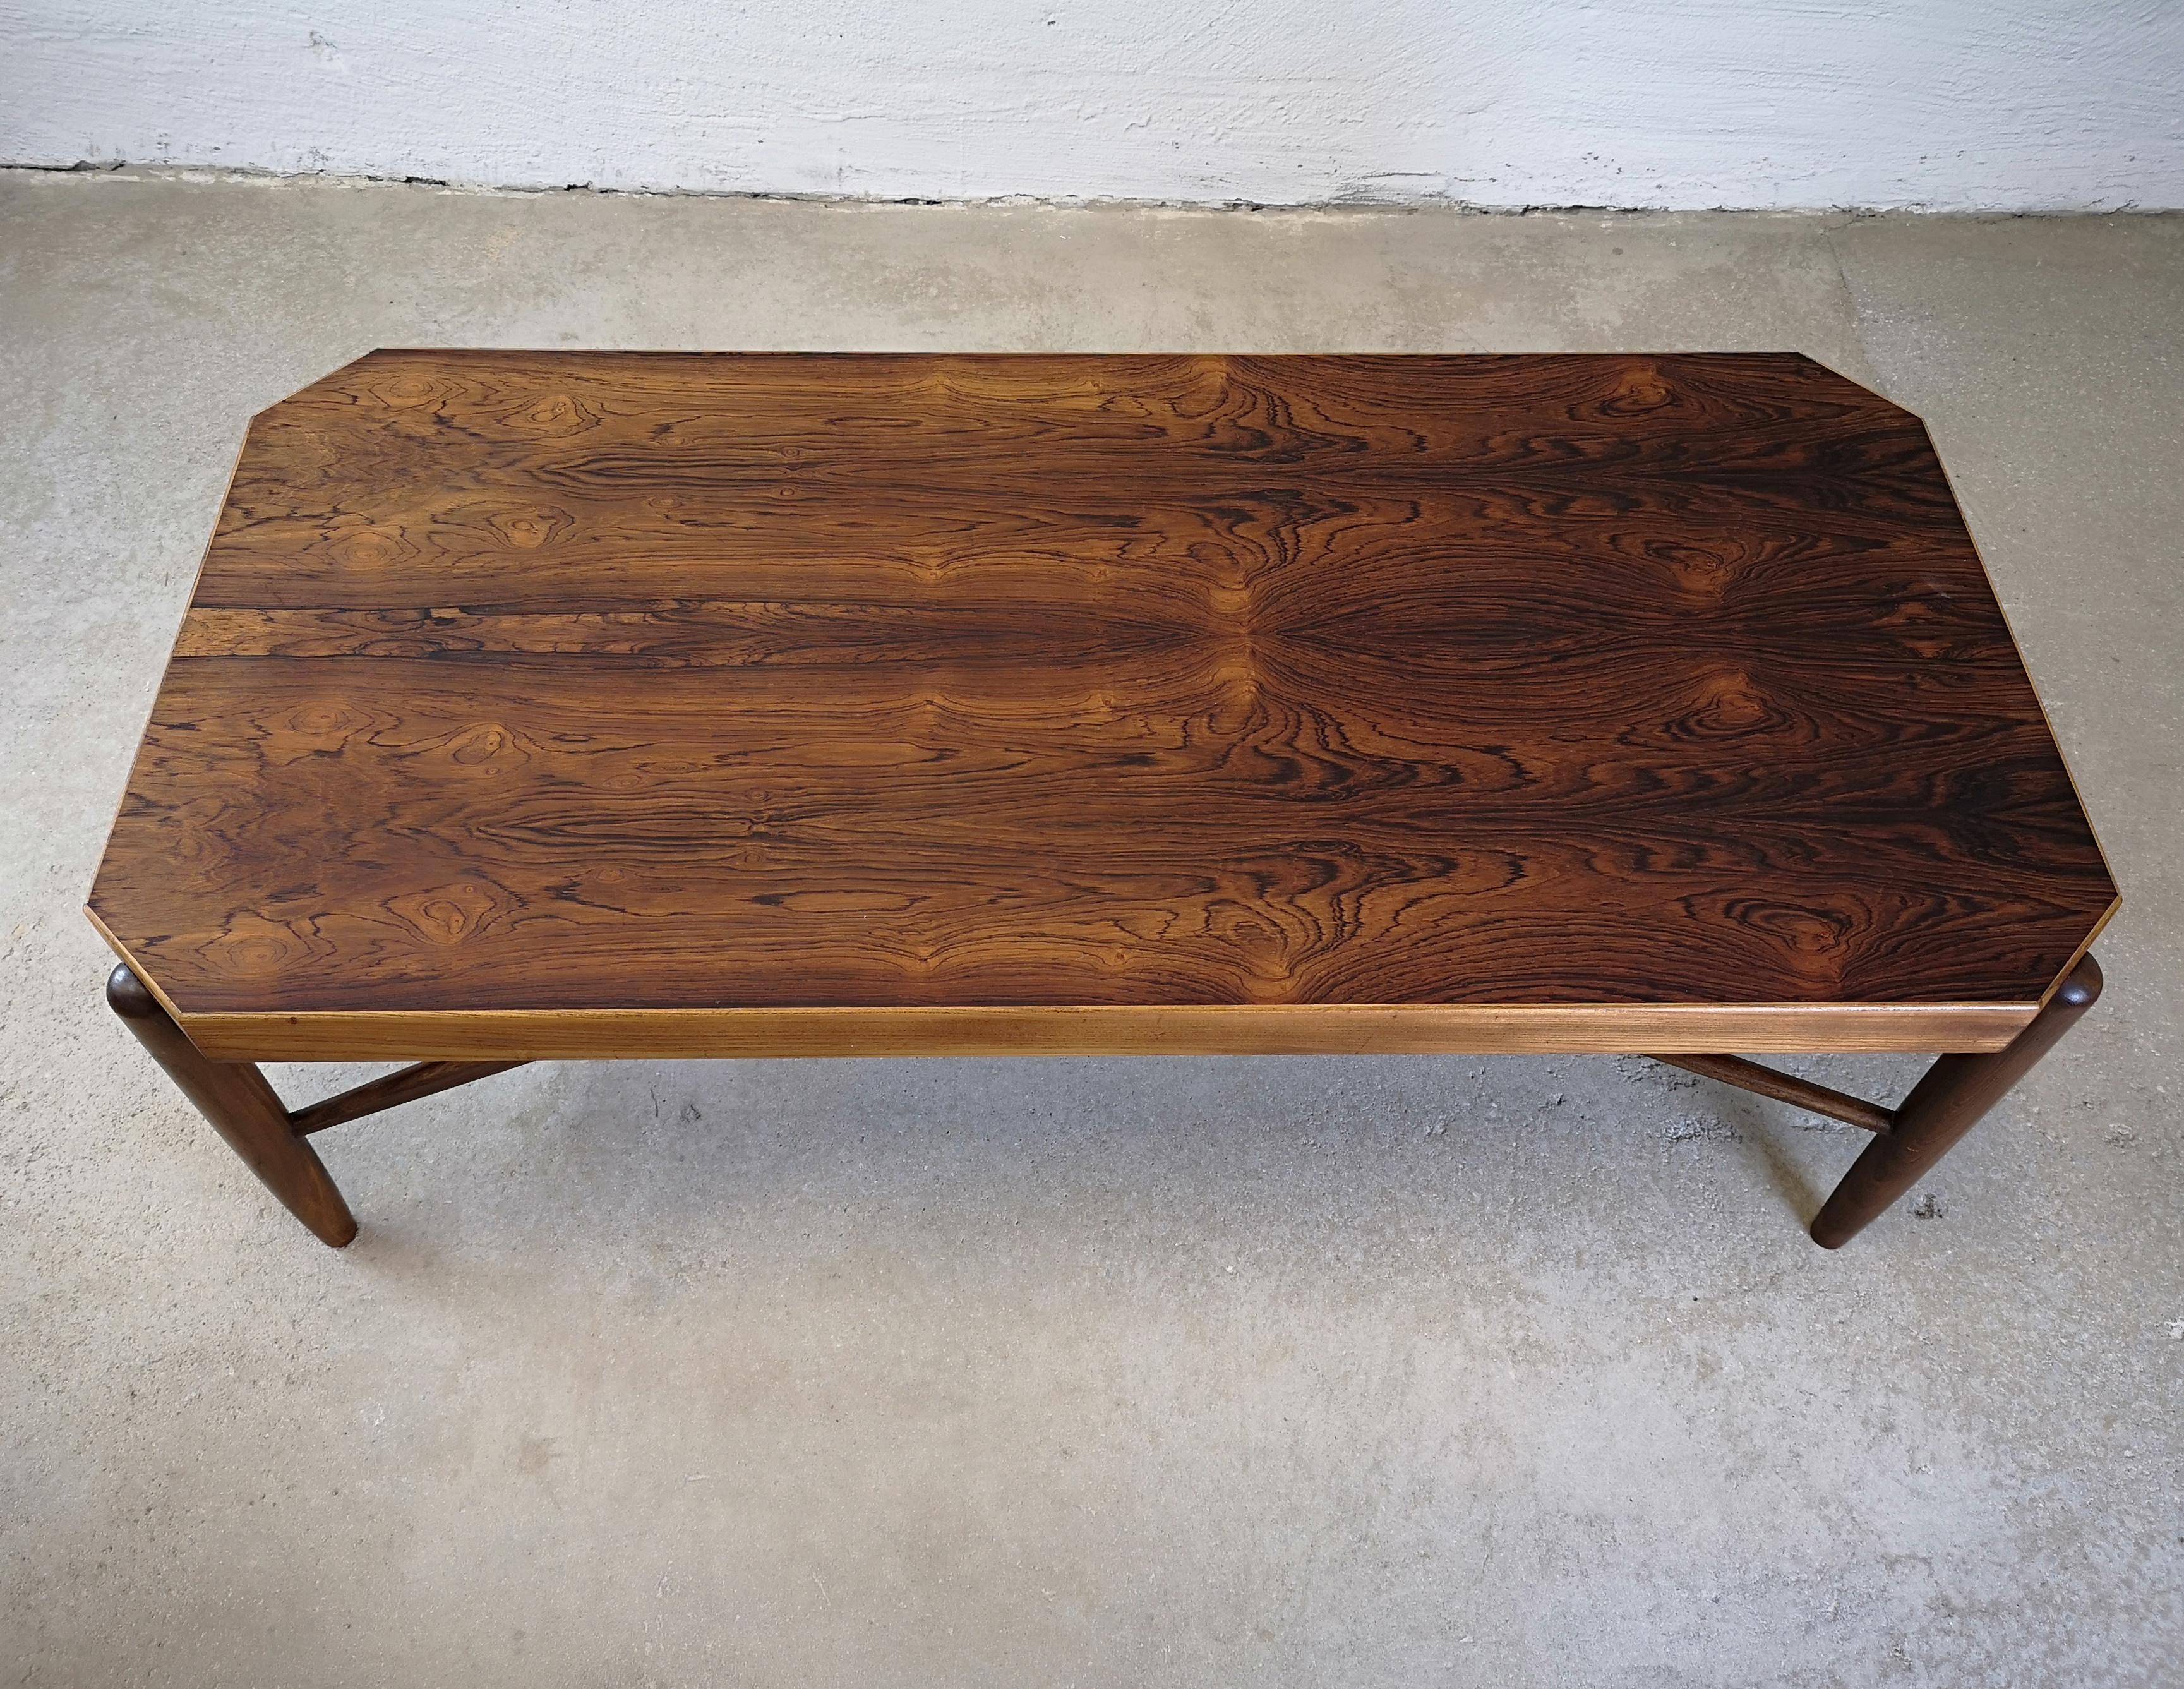 Rare Mid-Century Modern Danish modern Jason Ringsted rosewood and teak coffee table. 

The top of the table is in very good condition. The legs have wear and in vintage condition.